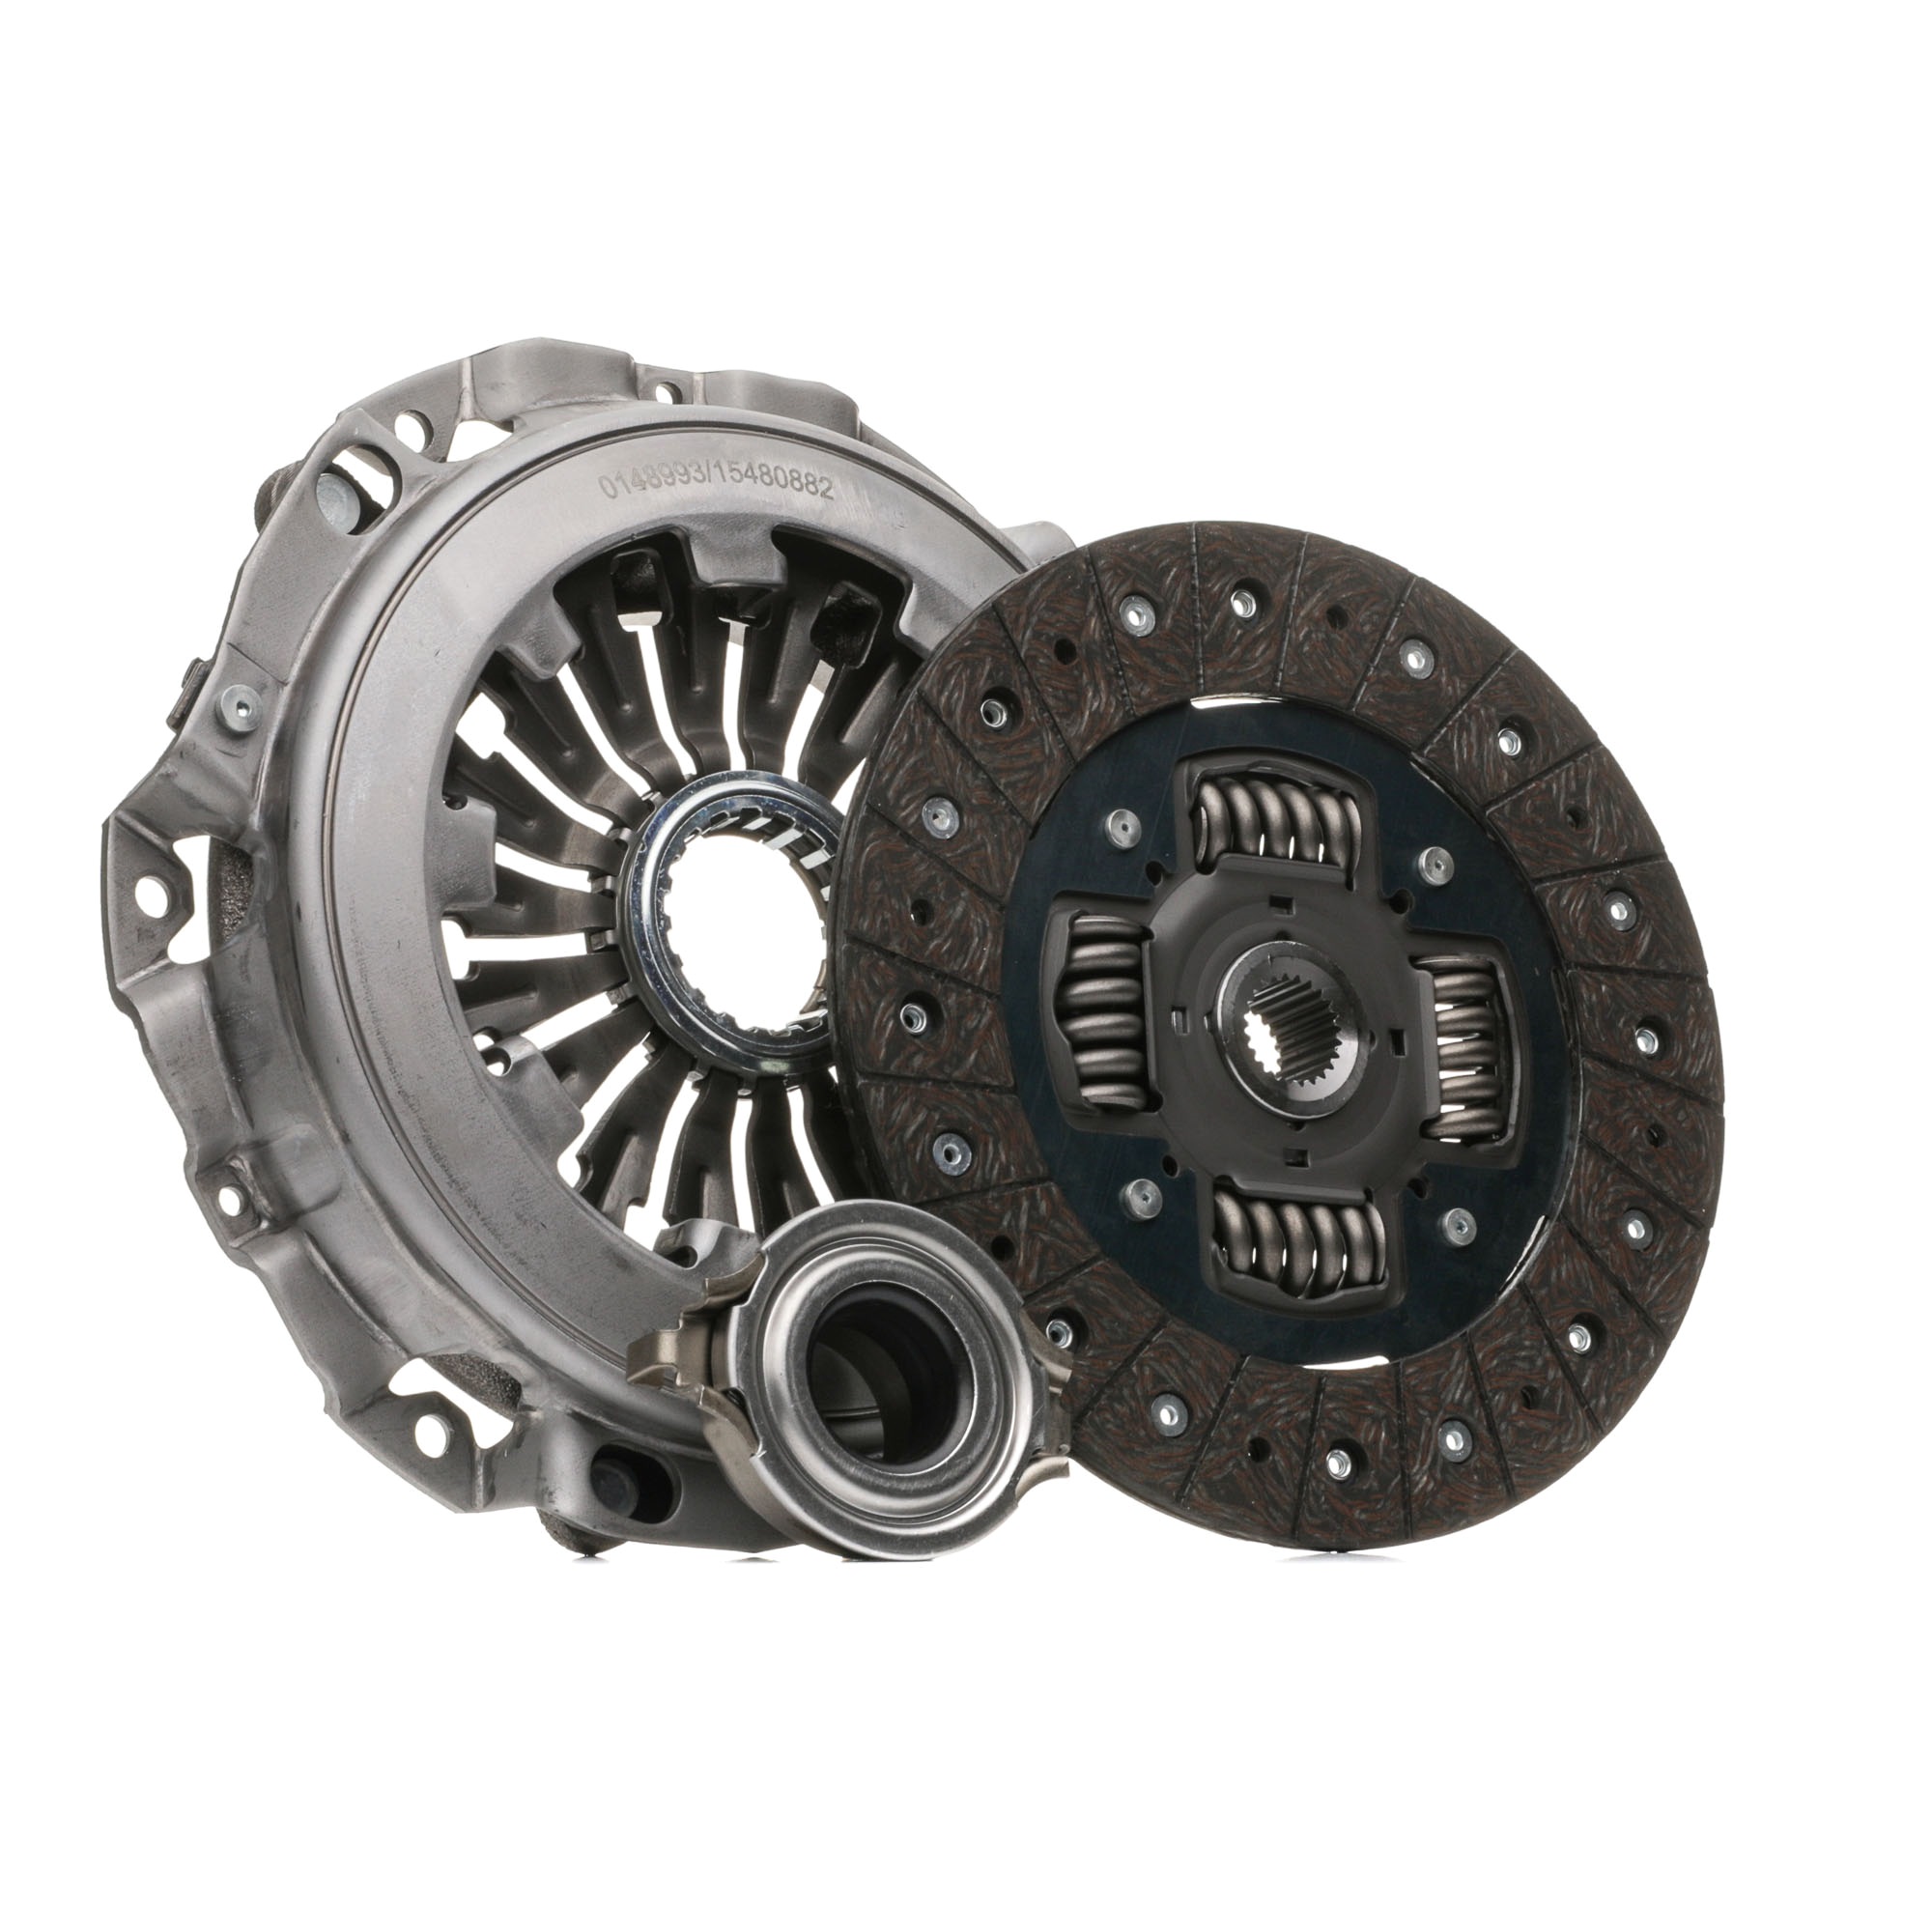 STARK SKCK-0100717 Clutch kit with clutch release bearing, 230mm